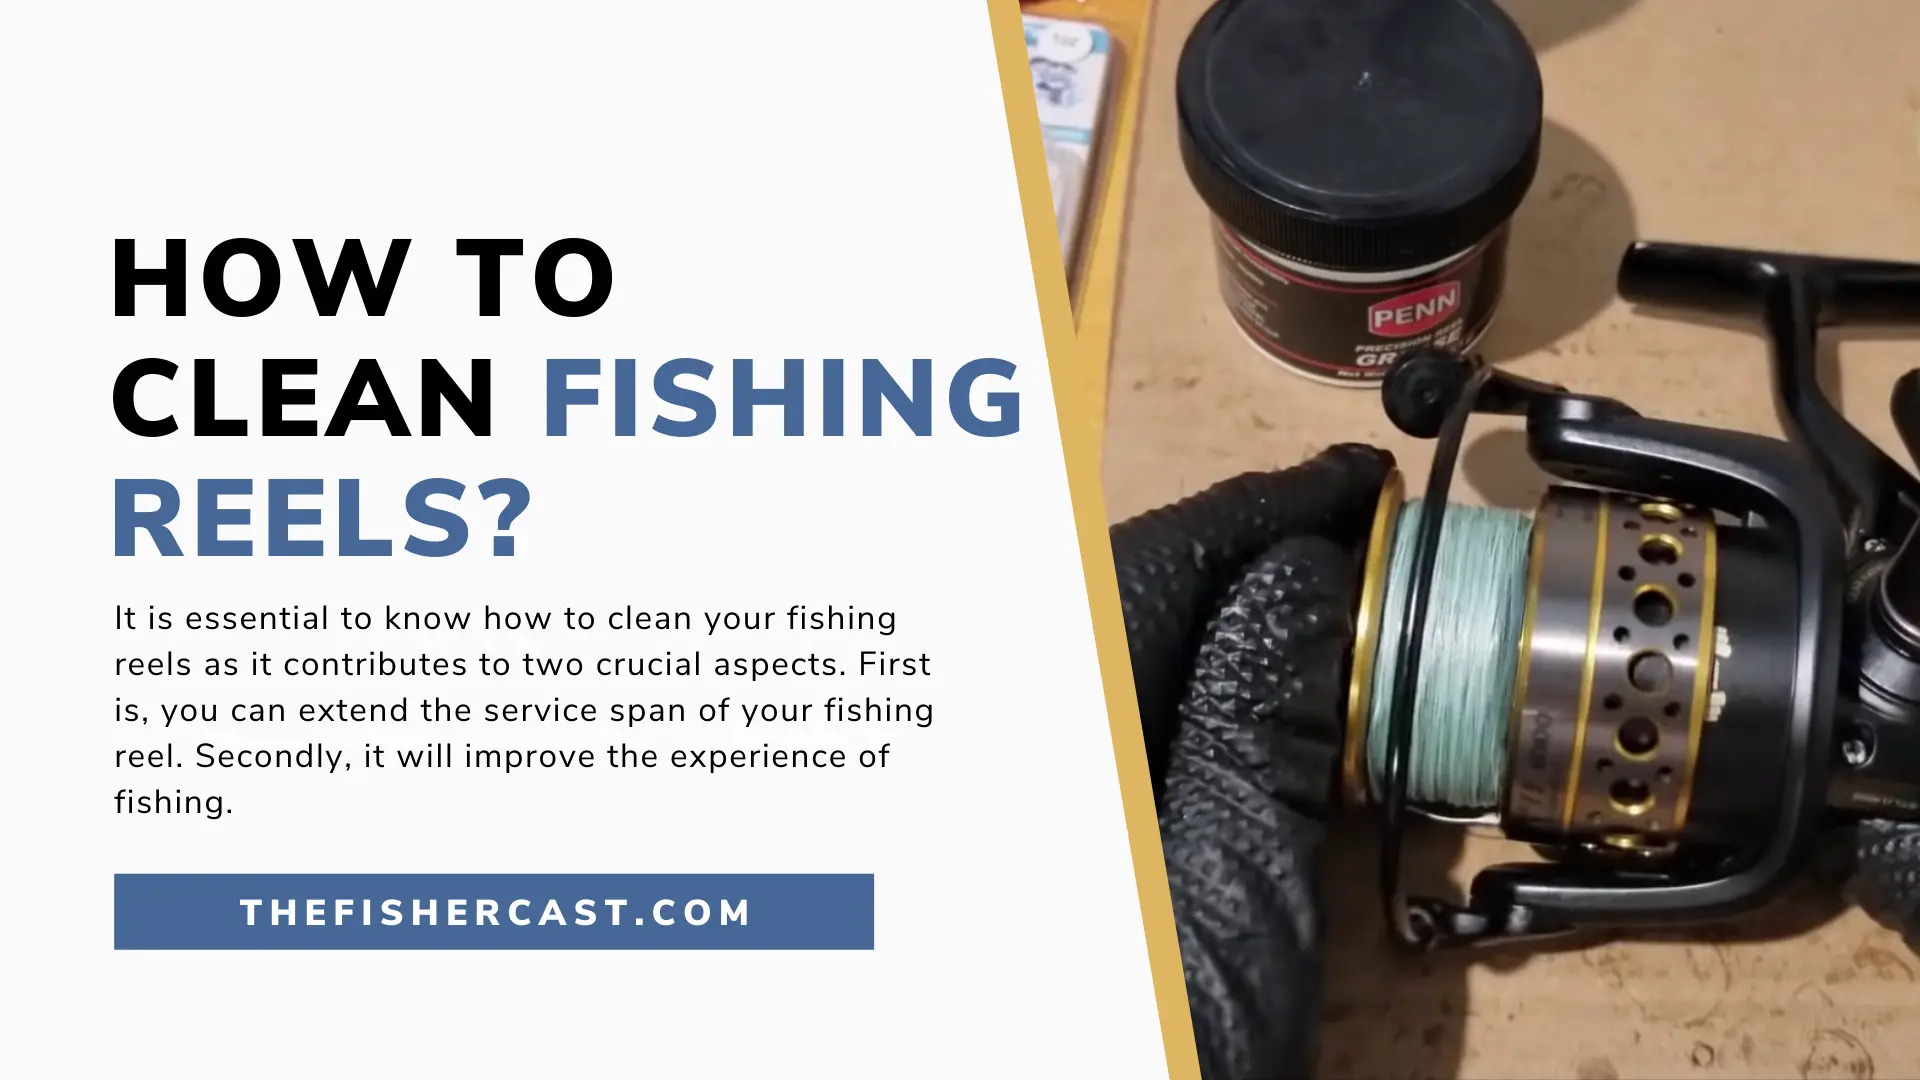 How to clean fishing reels